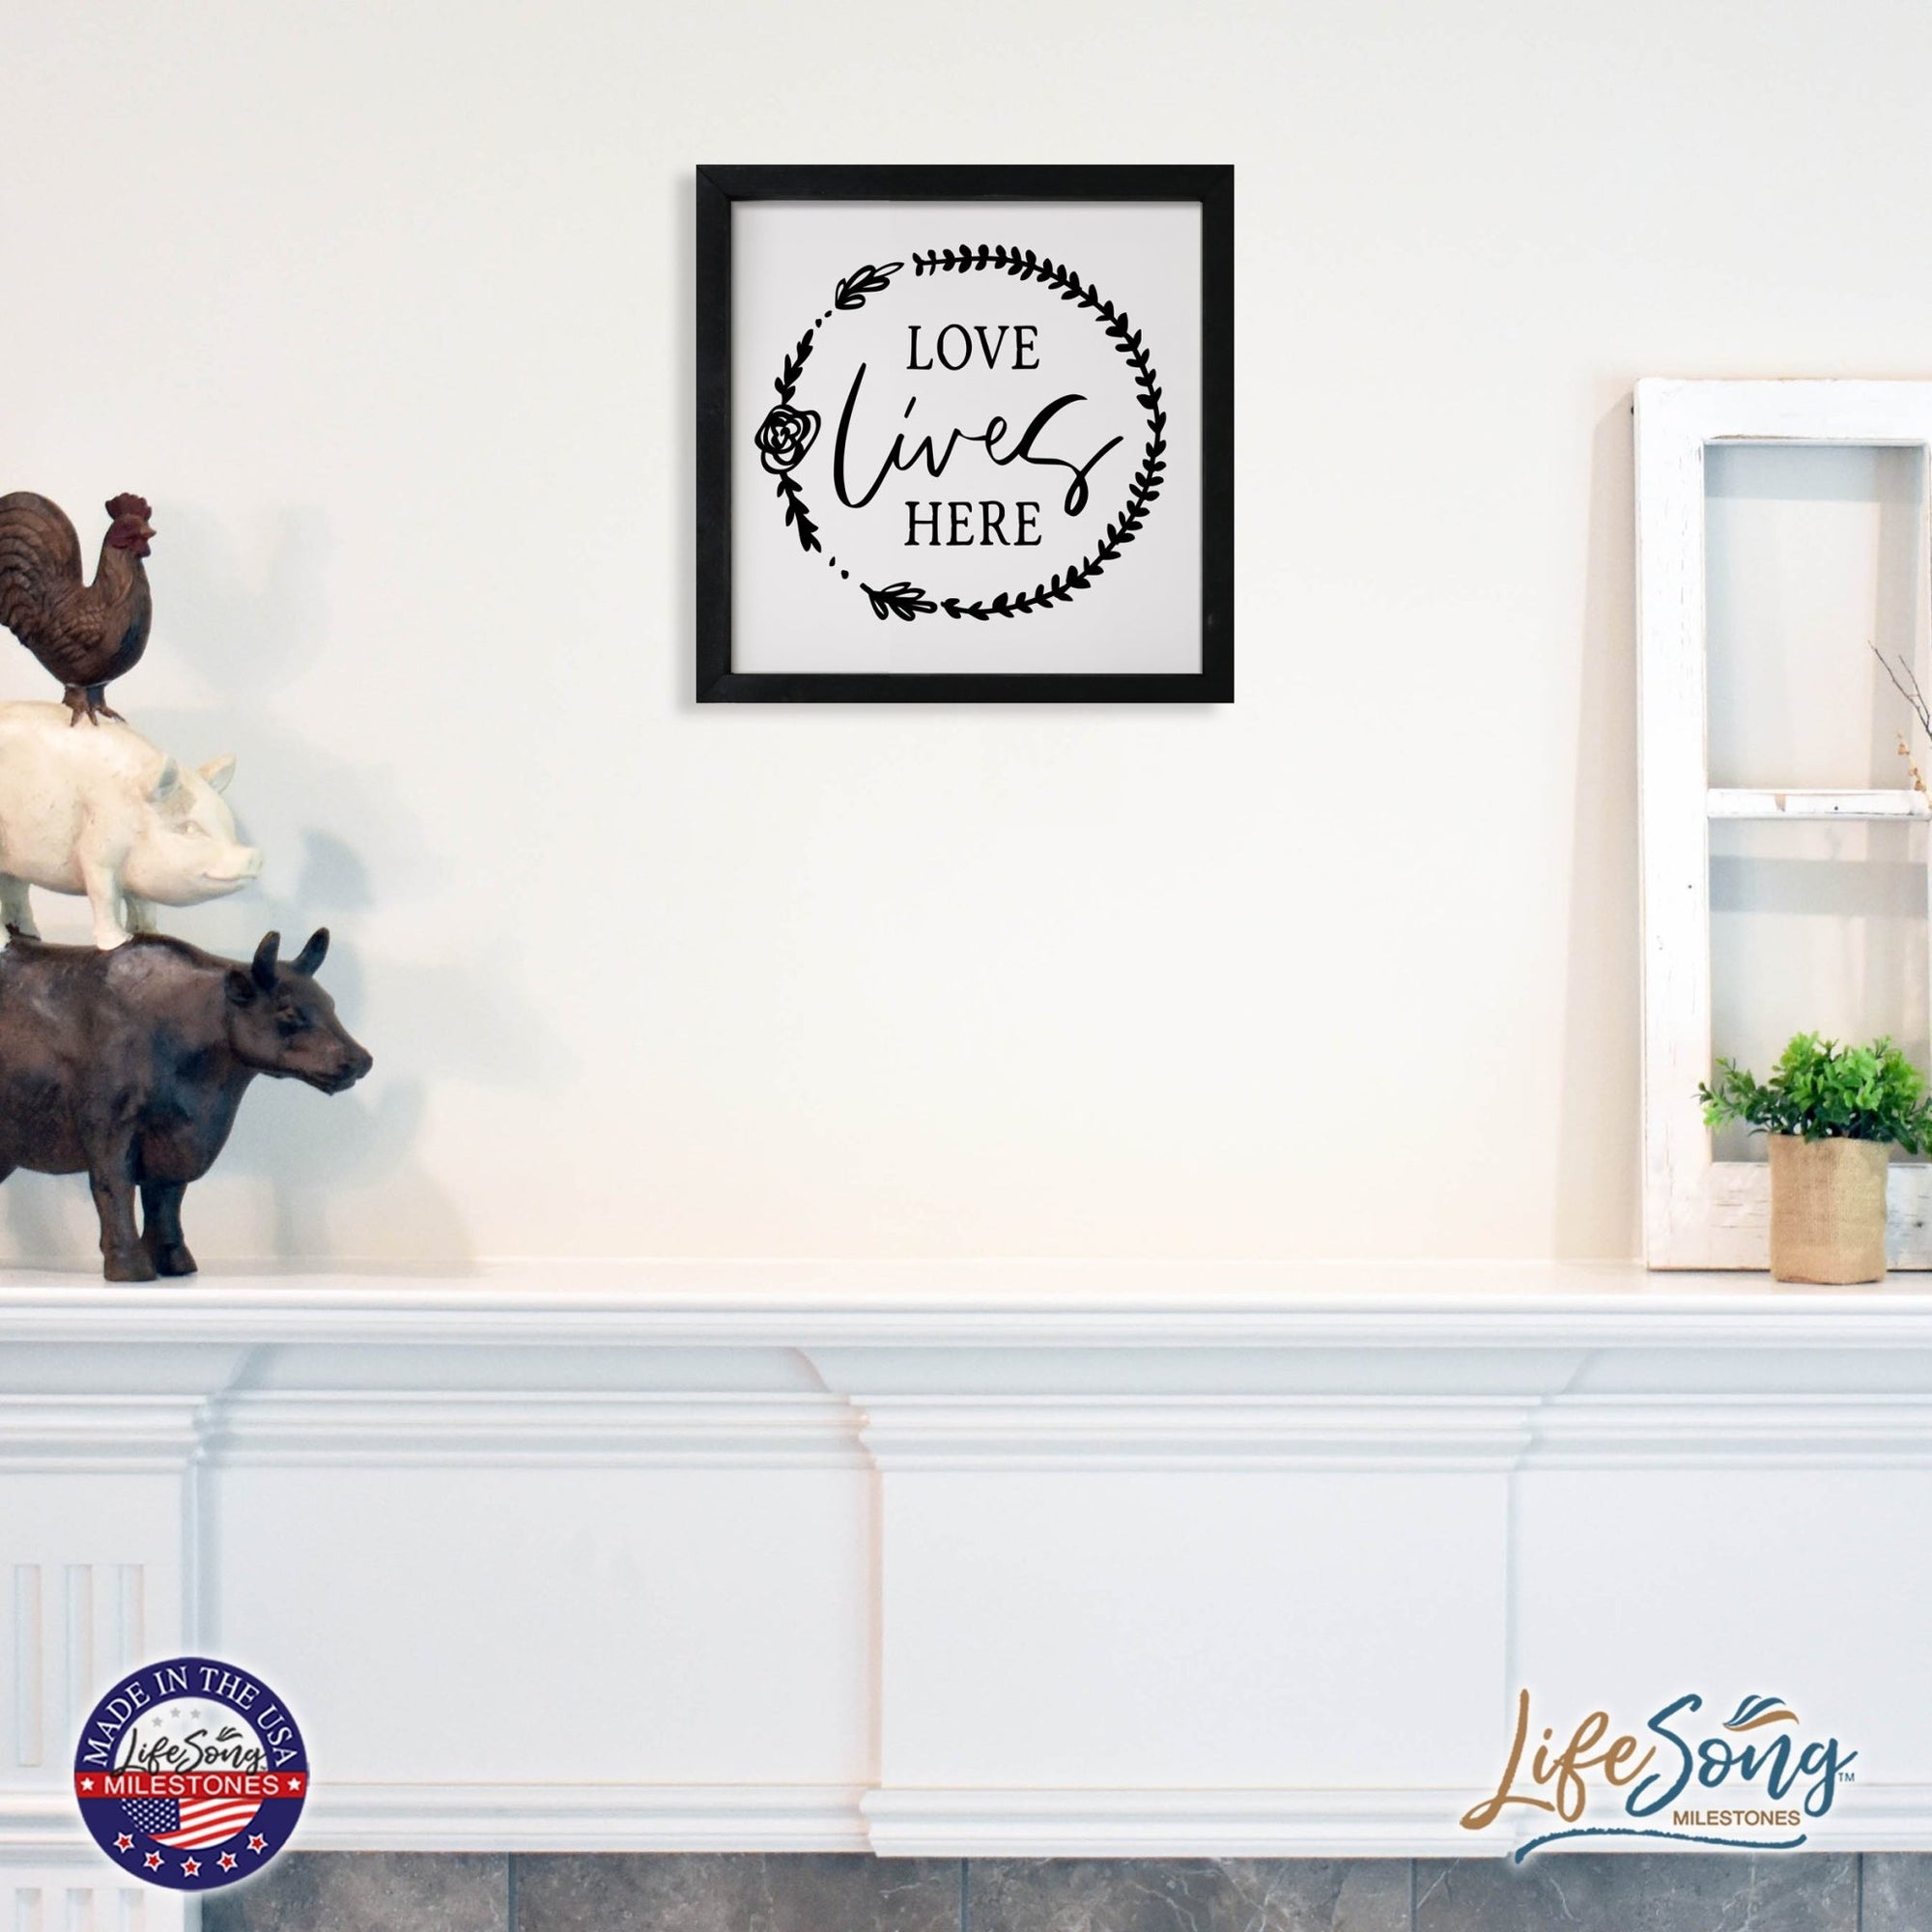 Inspiring Modern Framed Shadow Box 7x7in - Love Lives Here - LifeSong Milestones